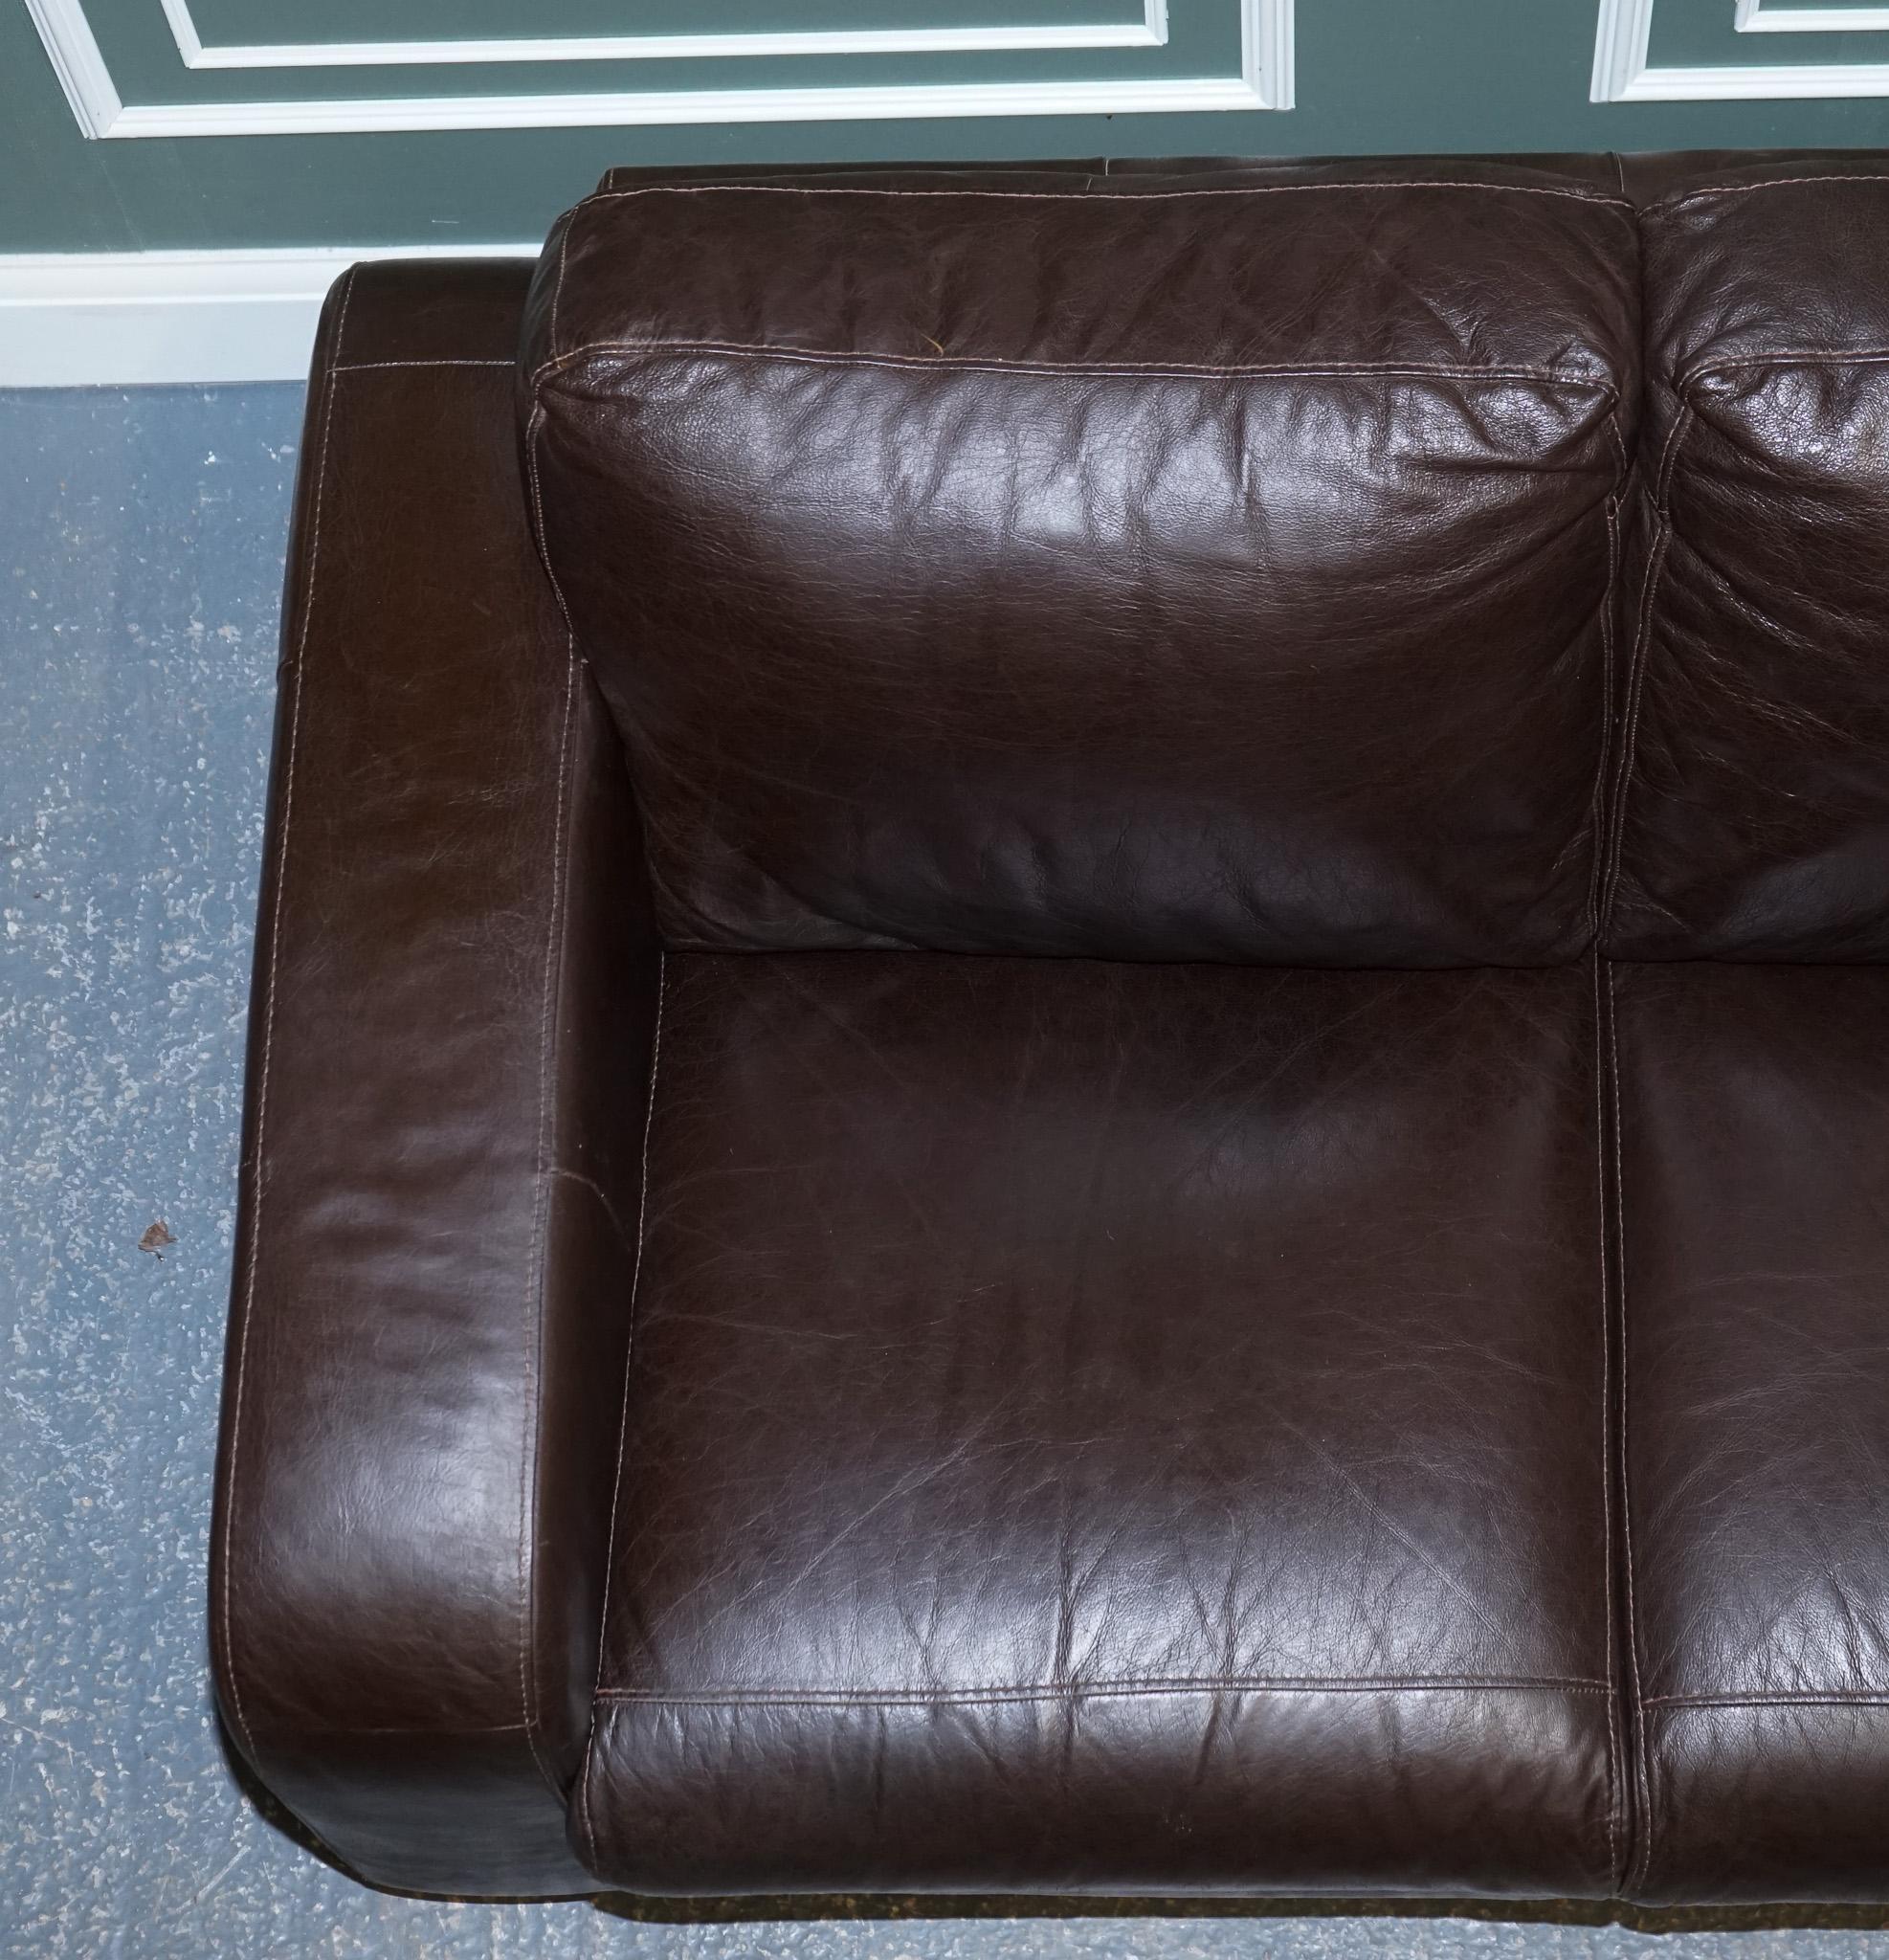 British Vintage Chocolate Brown Leather Two Seater Sofa by Sofitalia For Sale